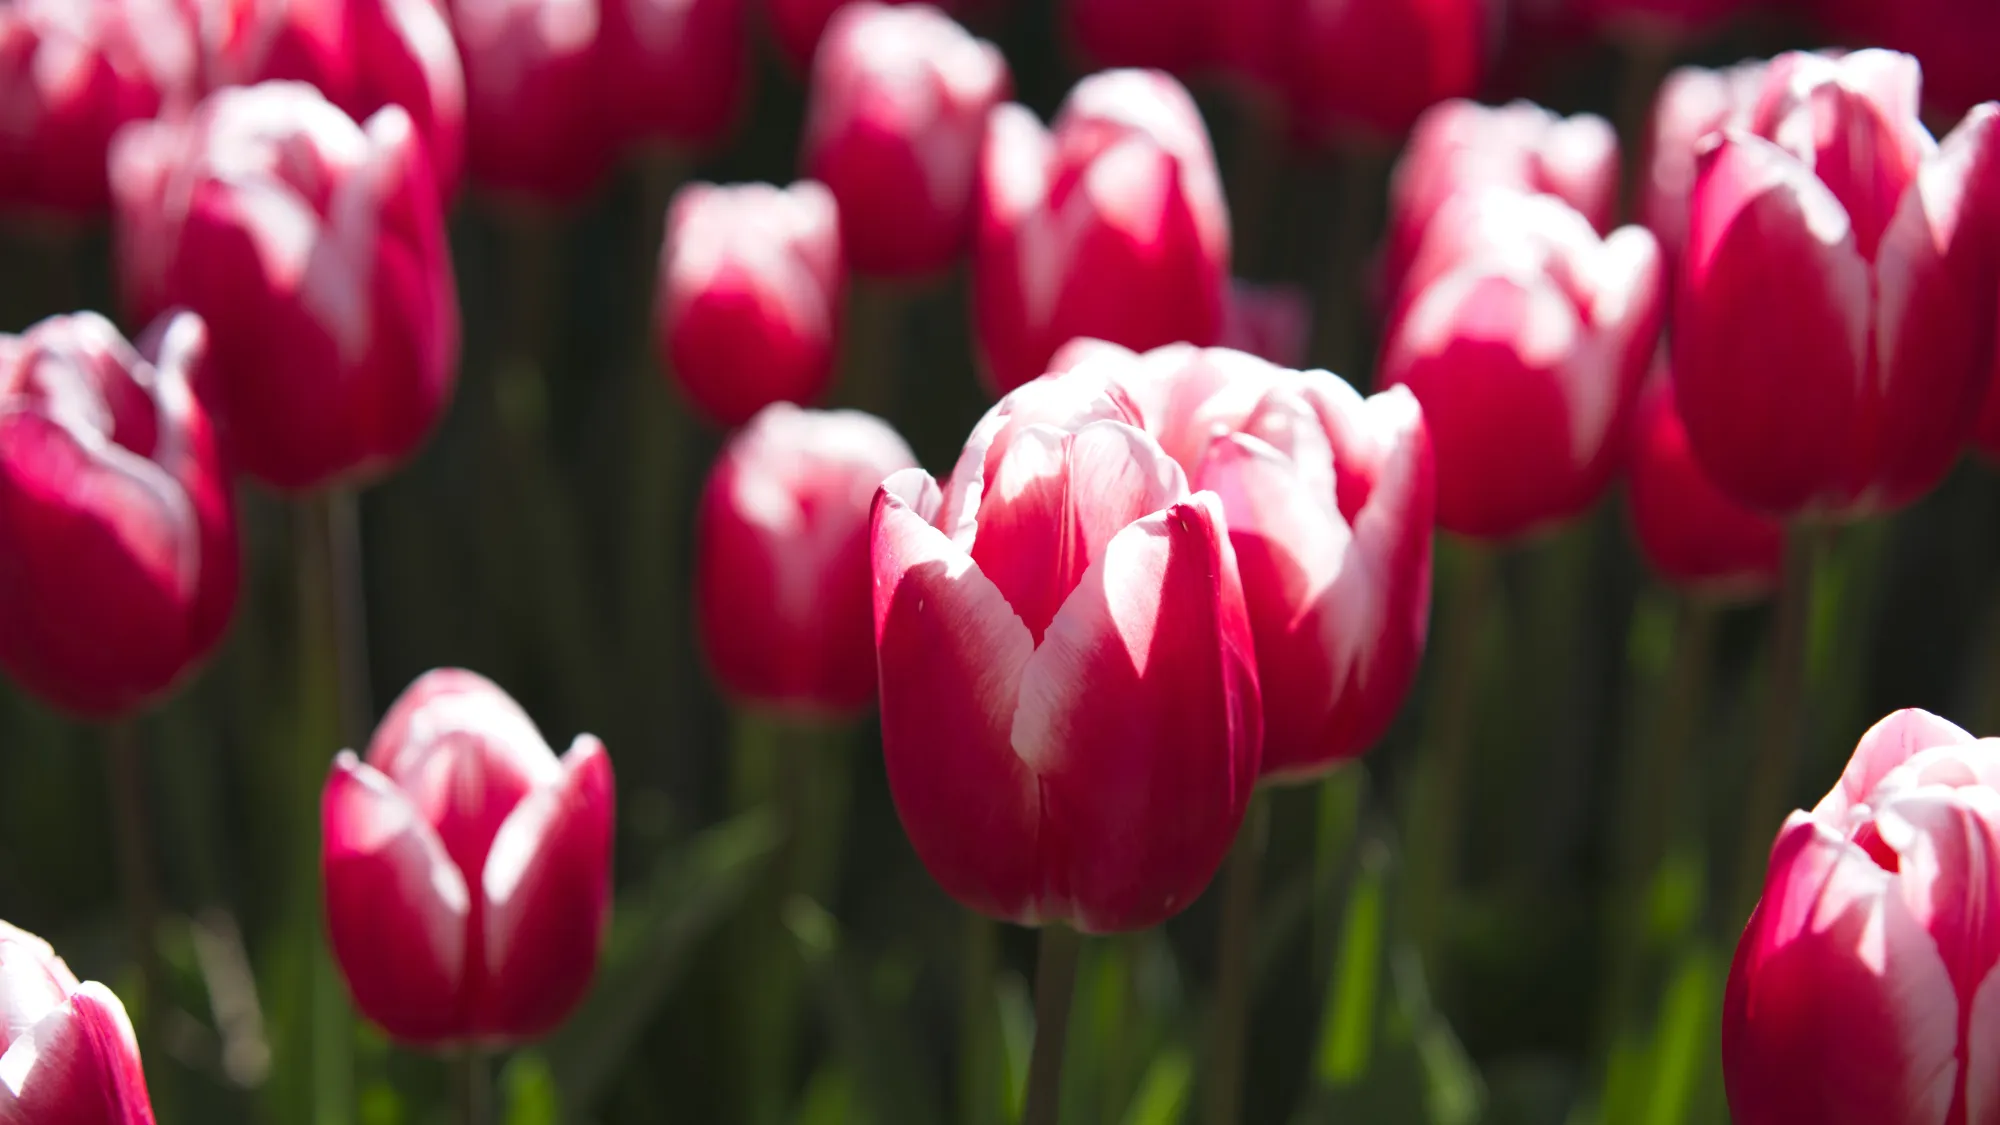 Close-up of pink/white tulips with a green stem background